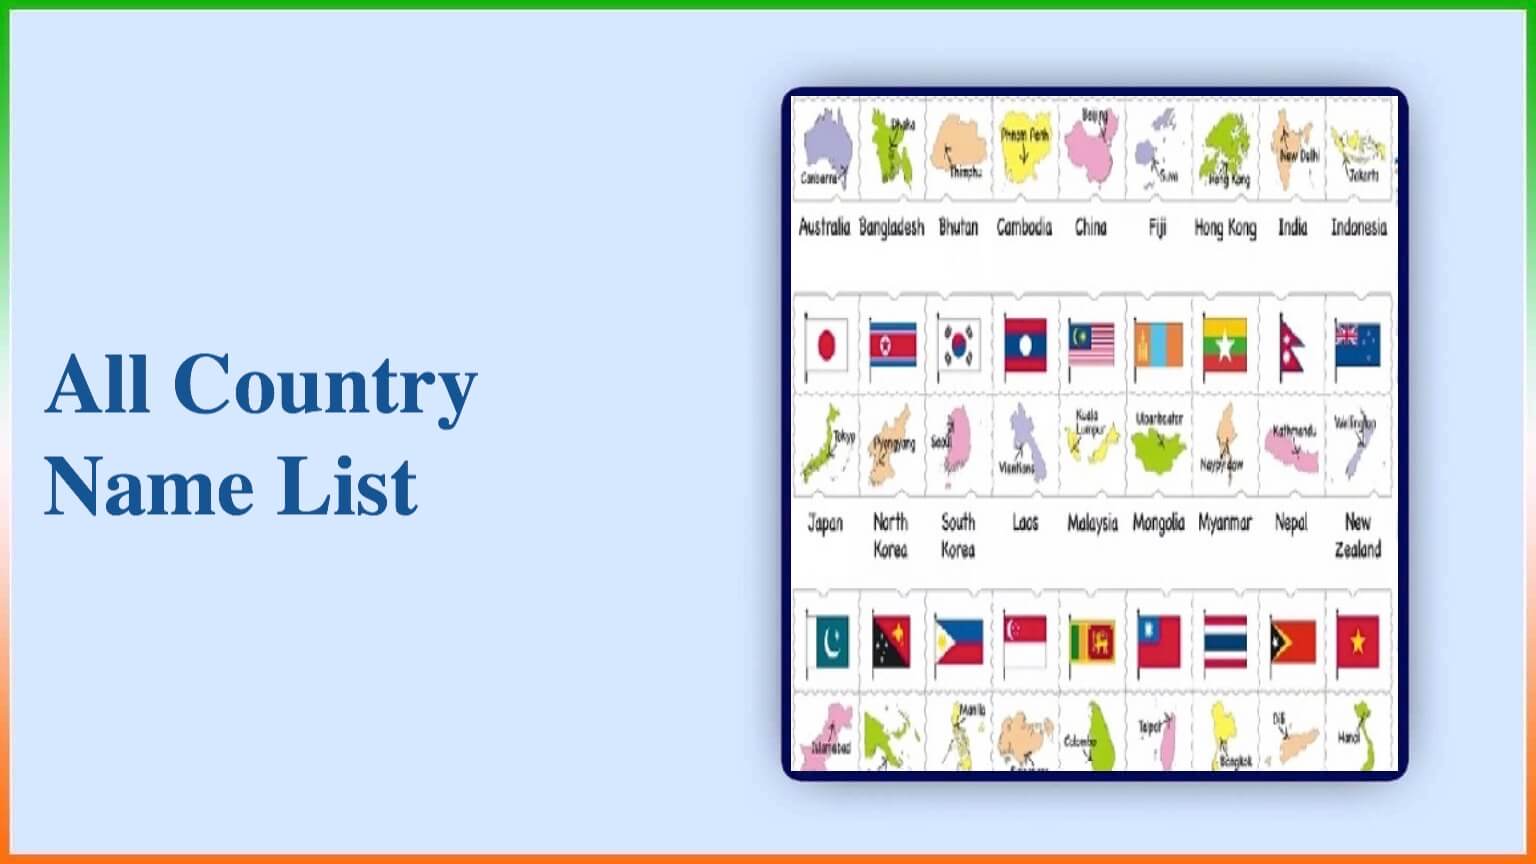 All Country Name List